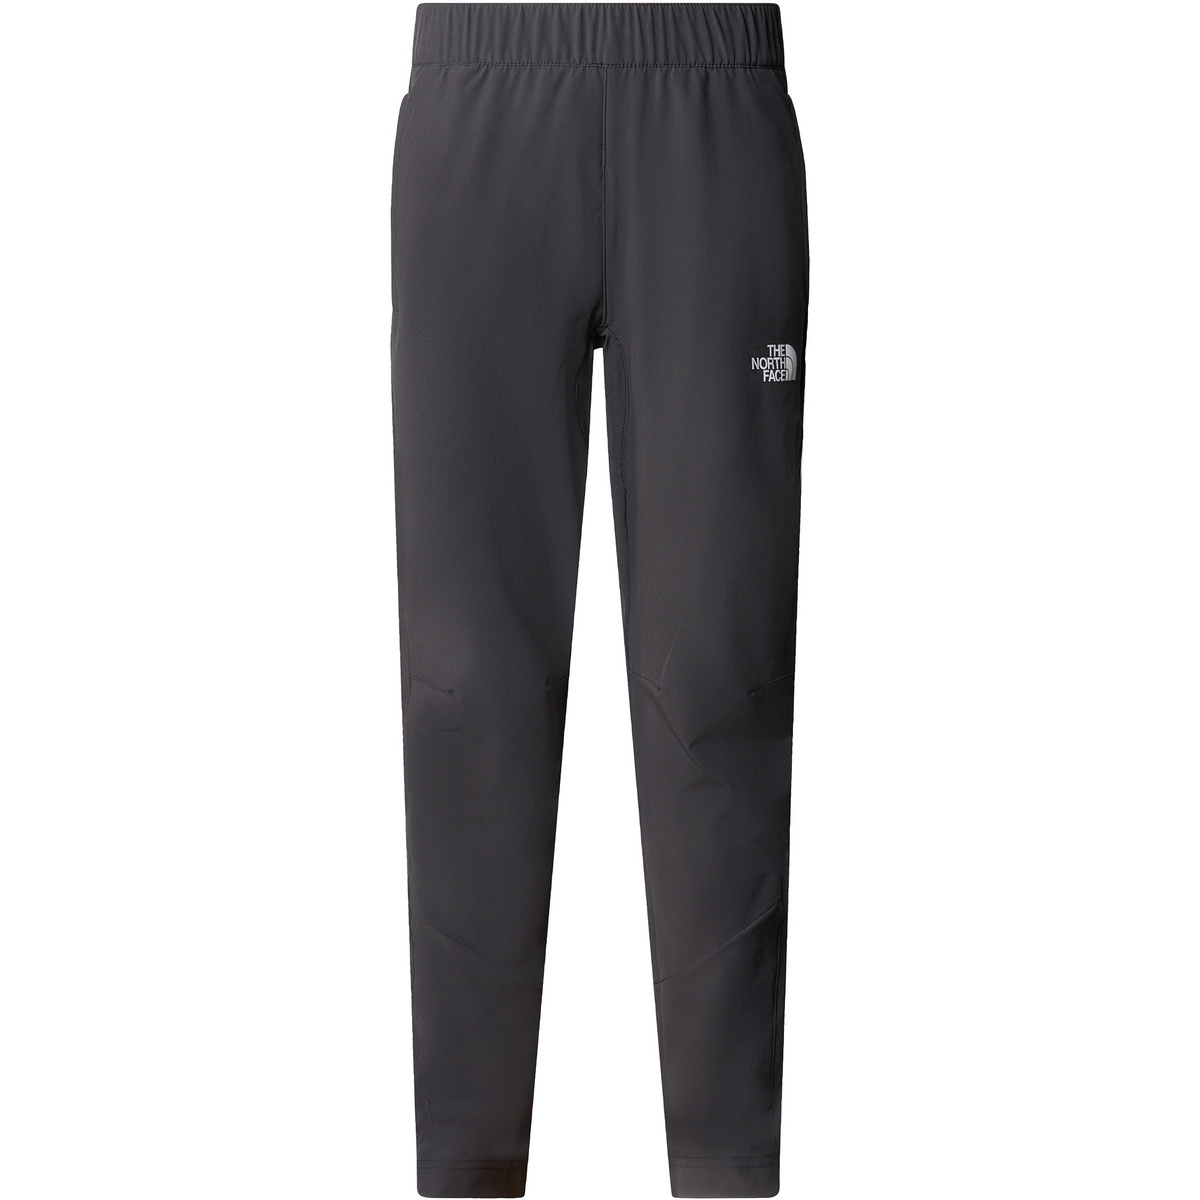 The North Face Kinder B Exploration Hose von The North Face